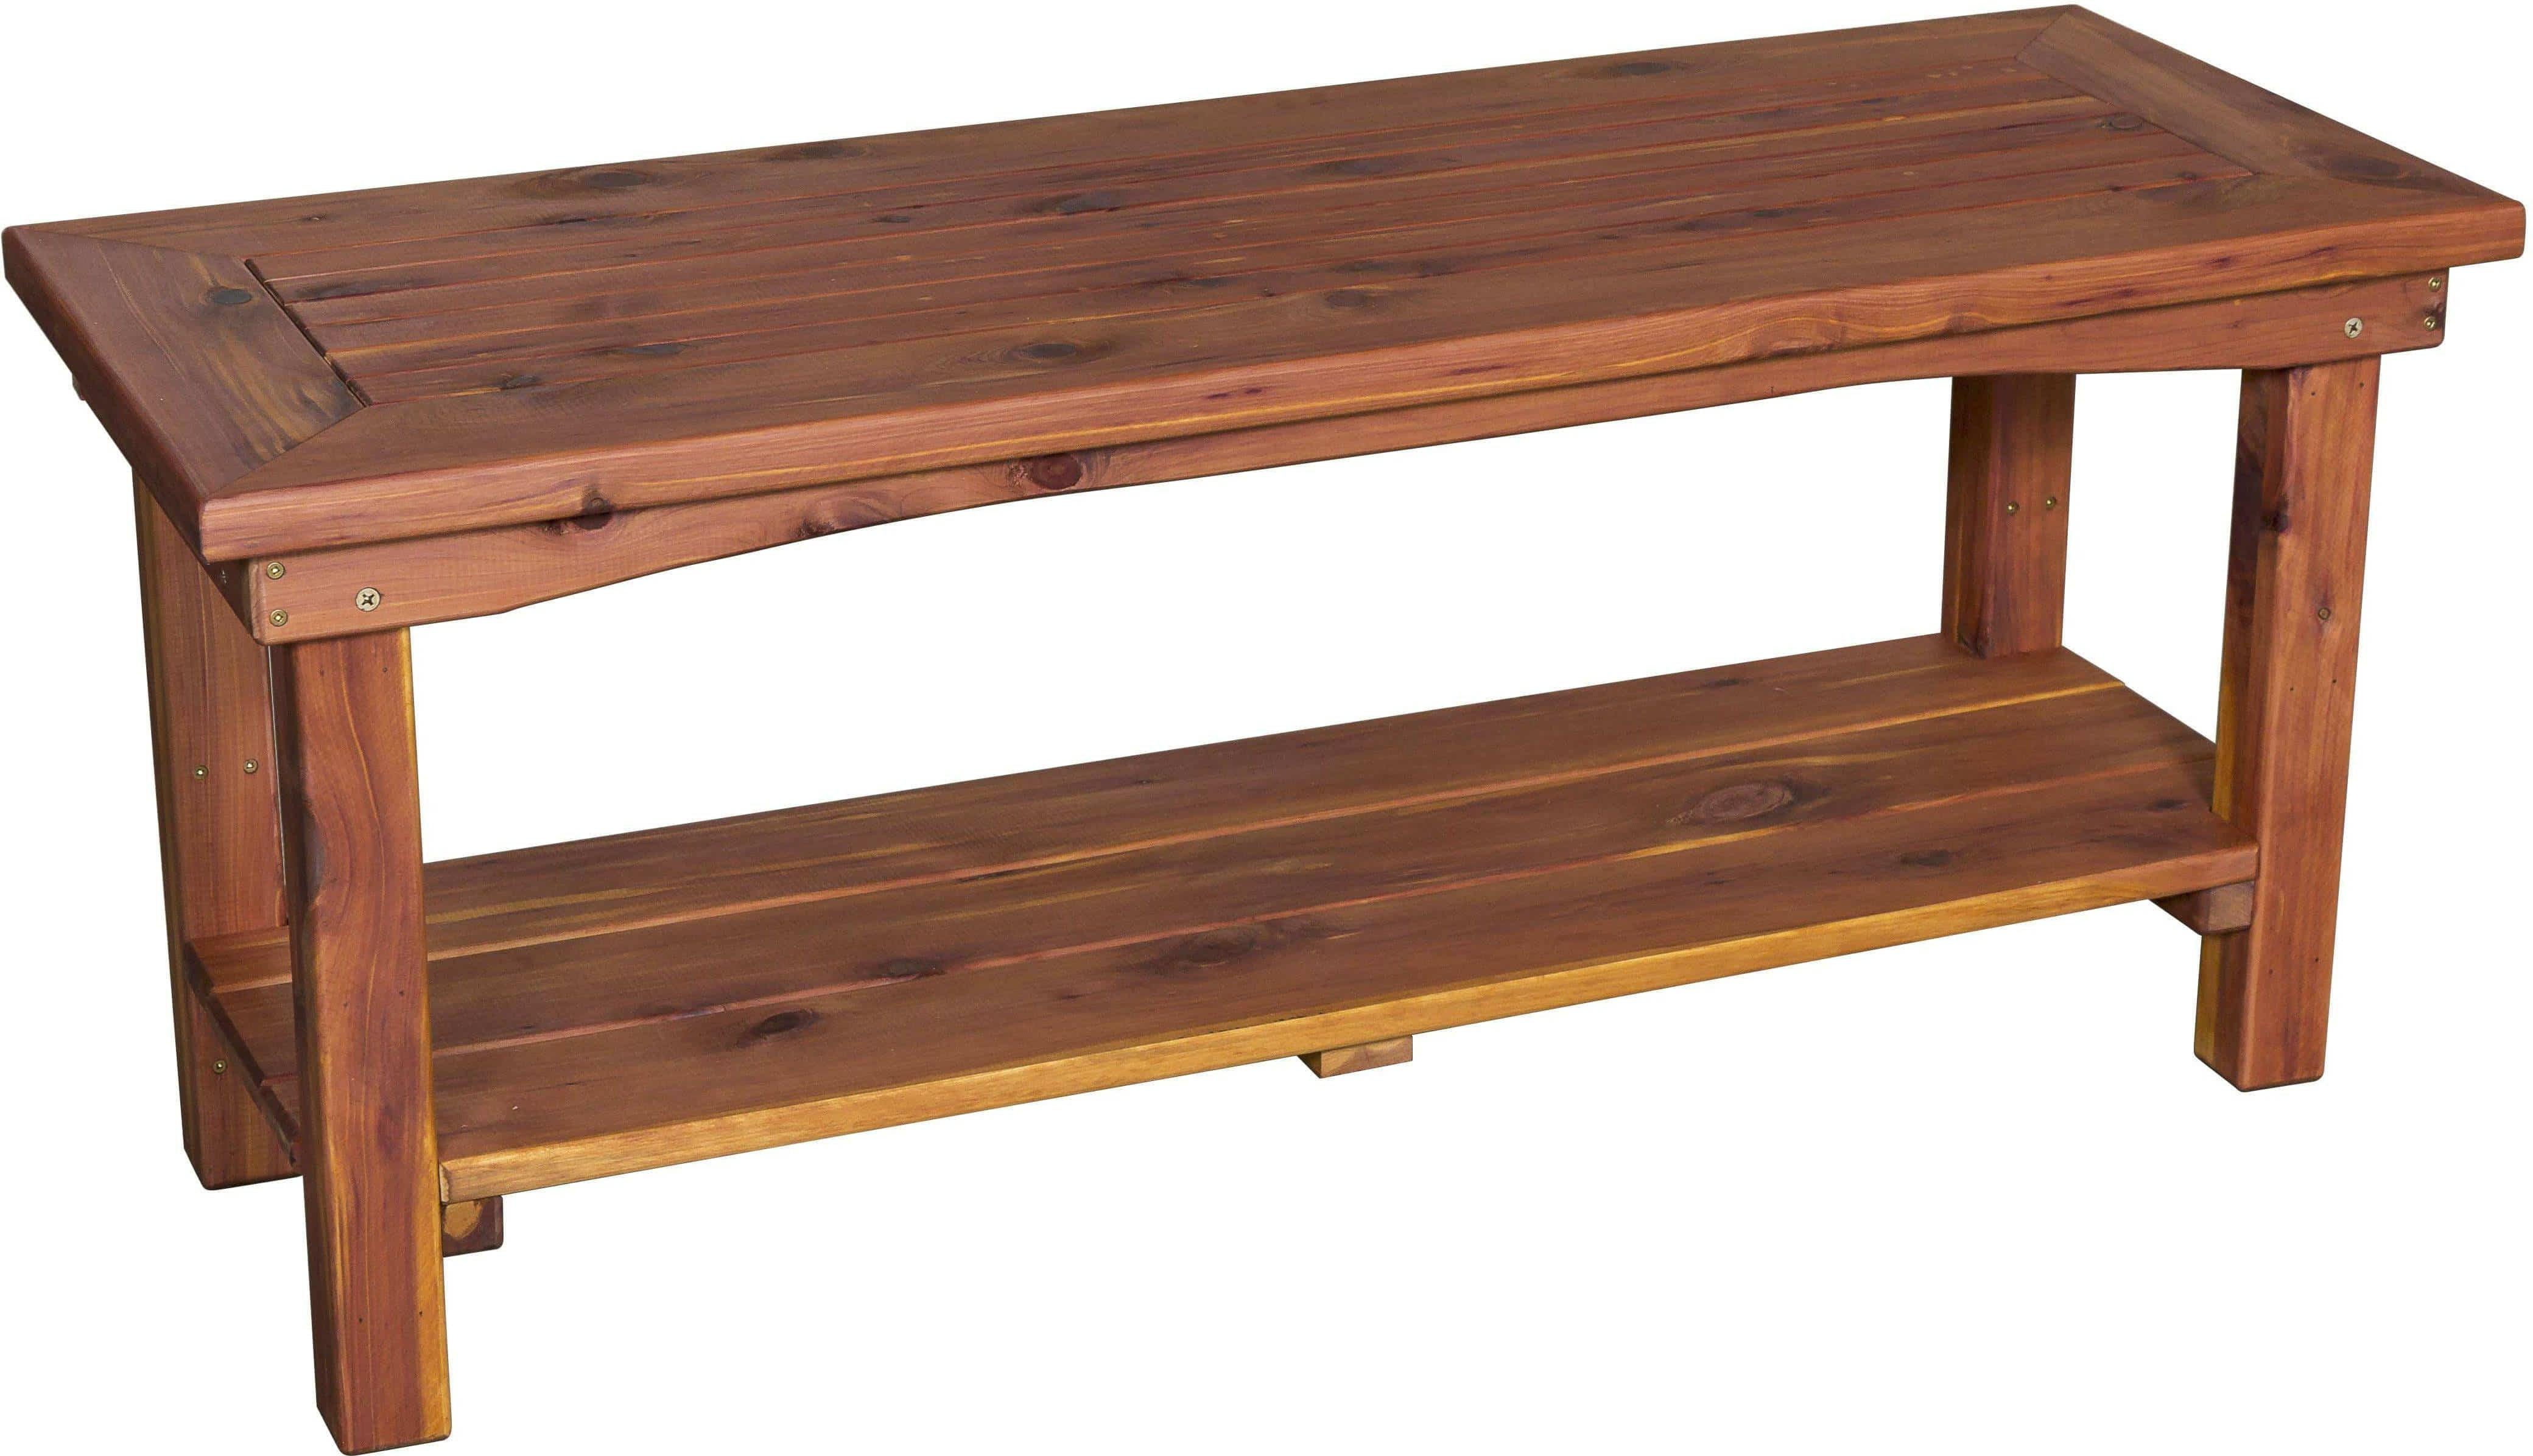 Nature’s Lawn & Patio 48" Wood Coffee Table-Rustic Furniture Marketplace